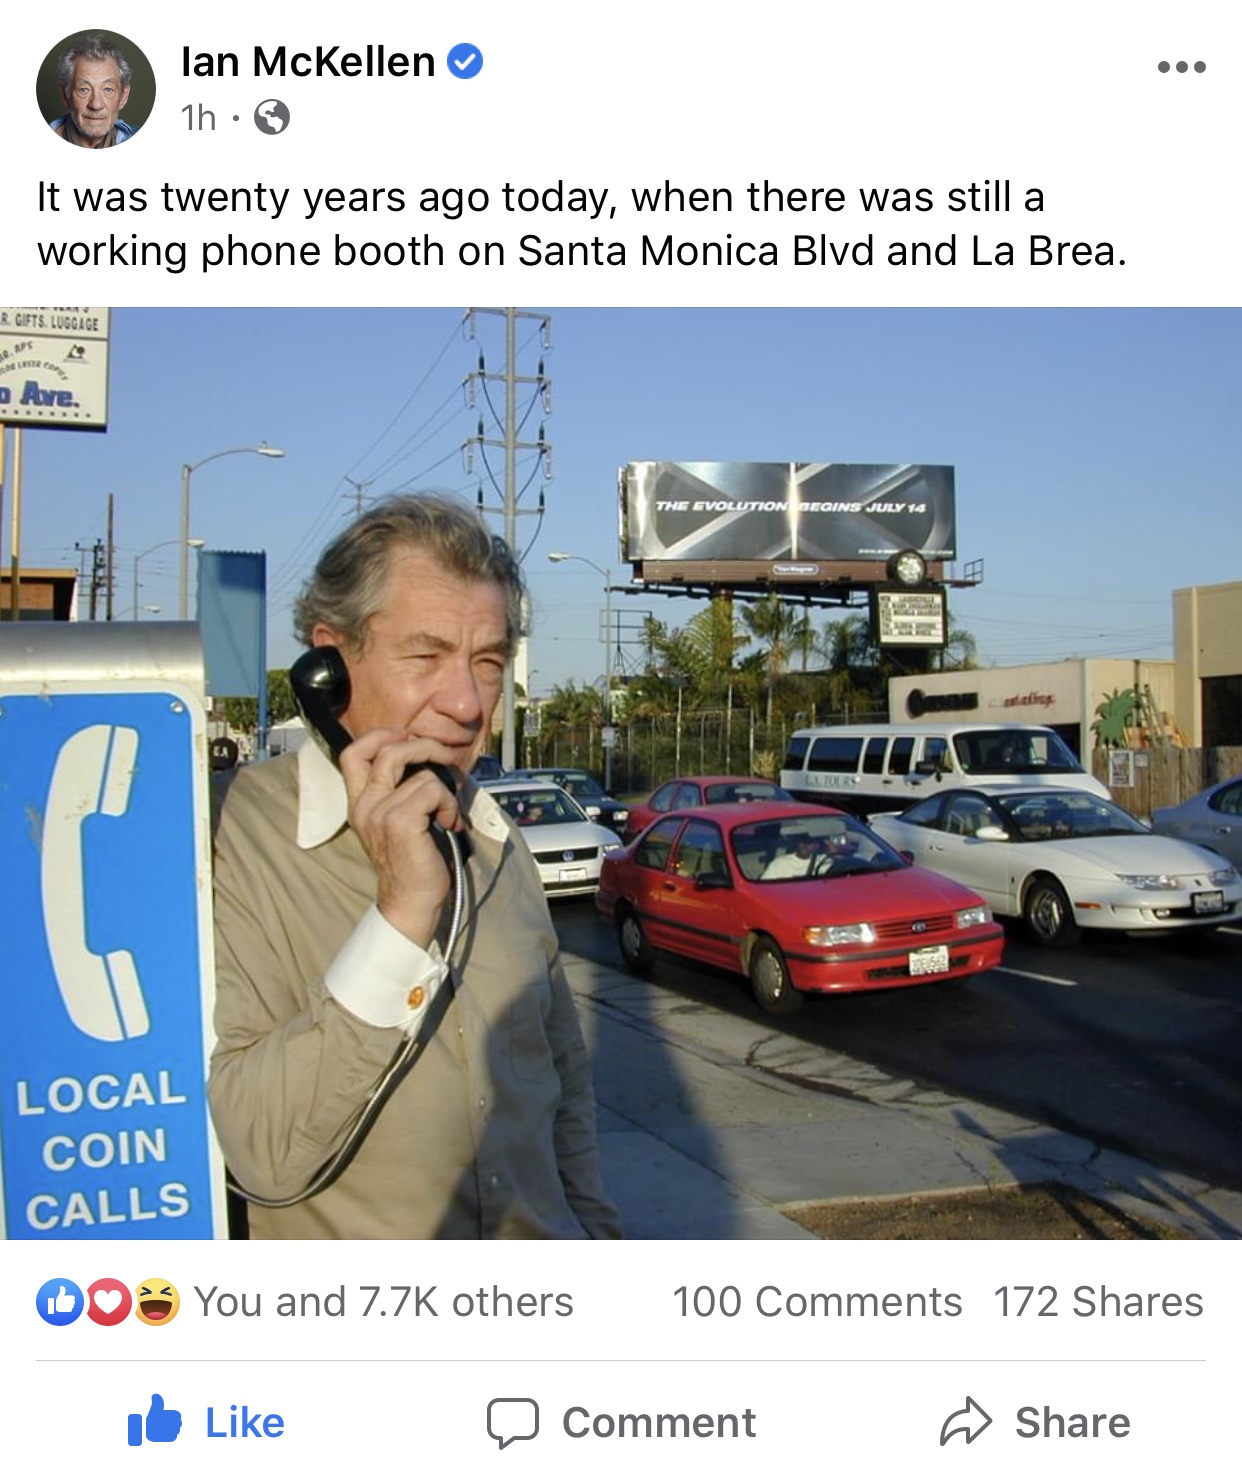 car - Ian McKellen 1h. It was twenty years ago today, when there was still a working phone booth on Santa Monica Blvd and La Brea. A. Local Coin Calls You and others 100 172 Comment